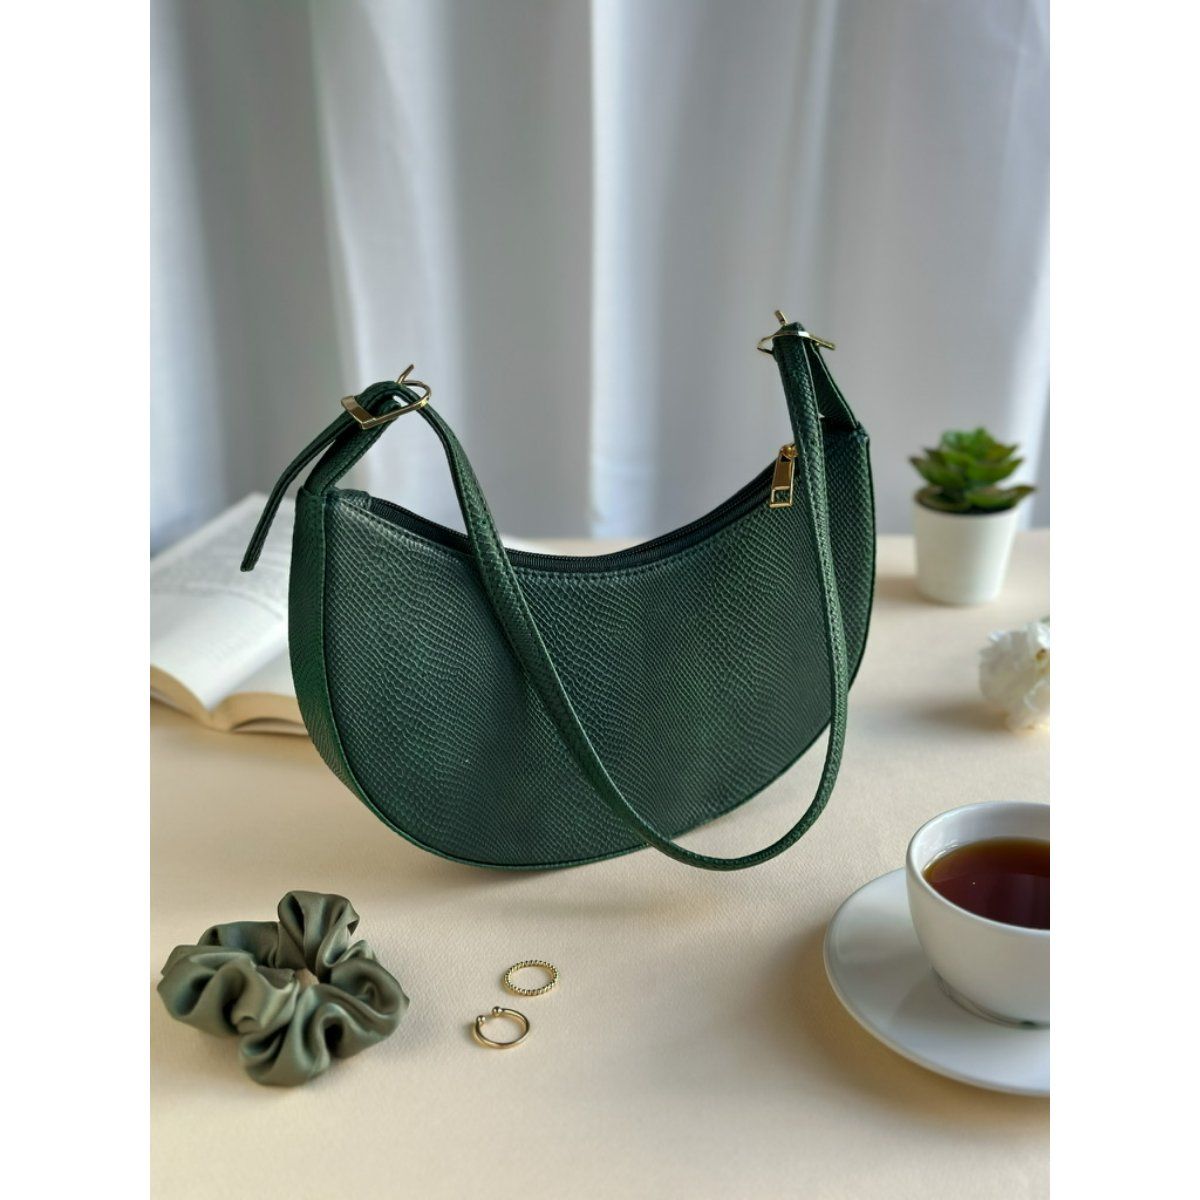 This Crescent Bag Looks Designer But Is Marked Down to Just $26 | Us Weekly